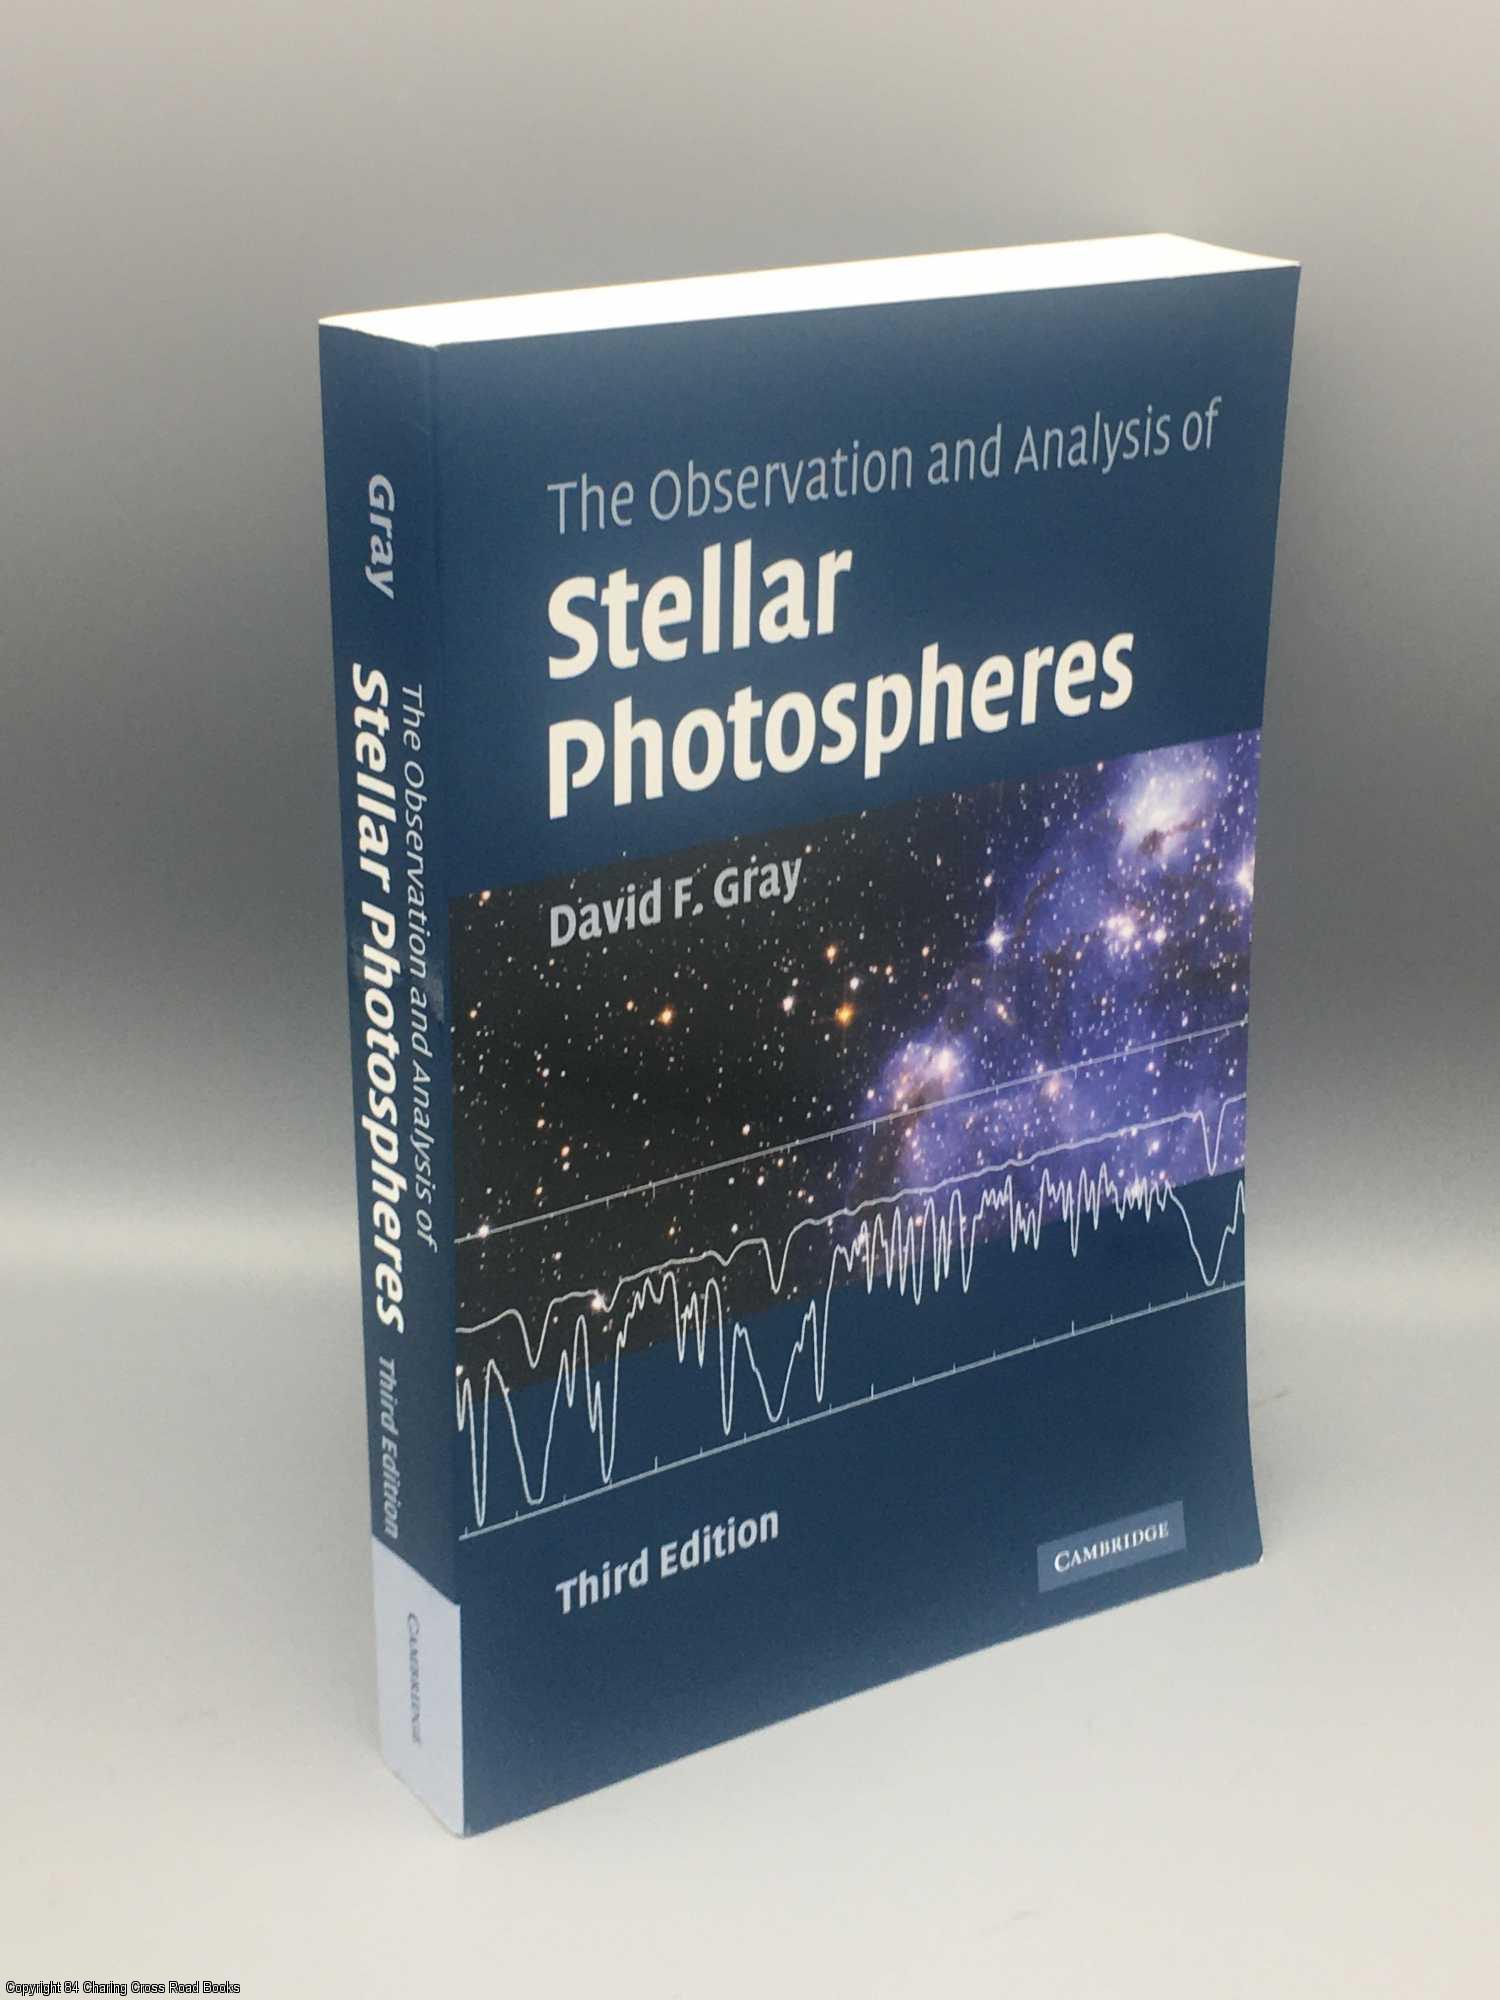 The Observation And Analysis Of Stellar Photospheres by David F. Gray on 84  Charing Cross Rare Books